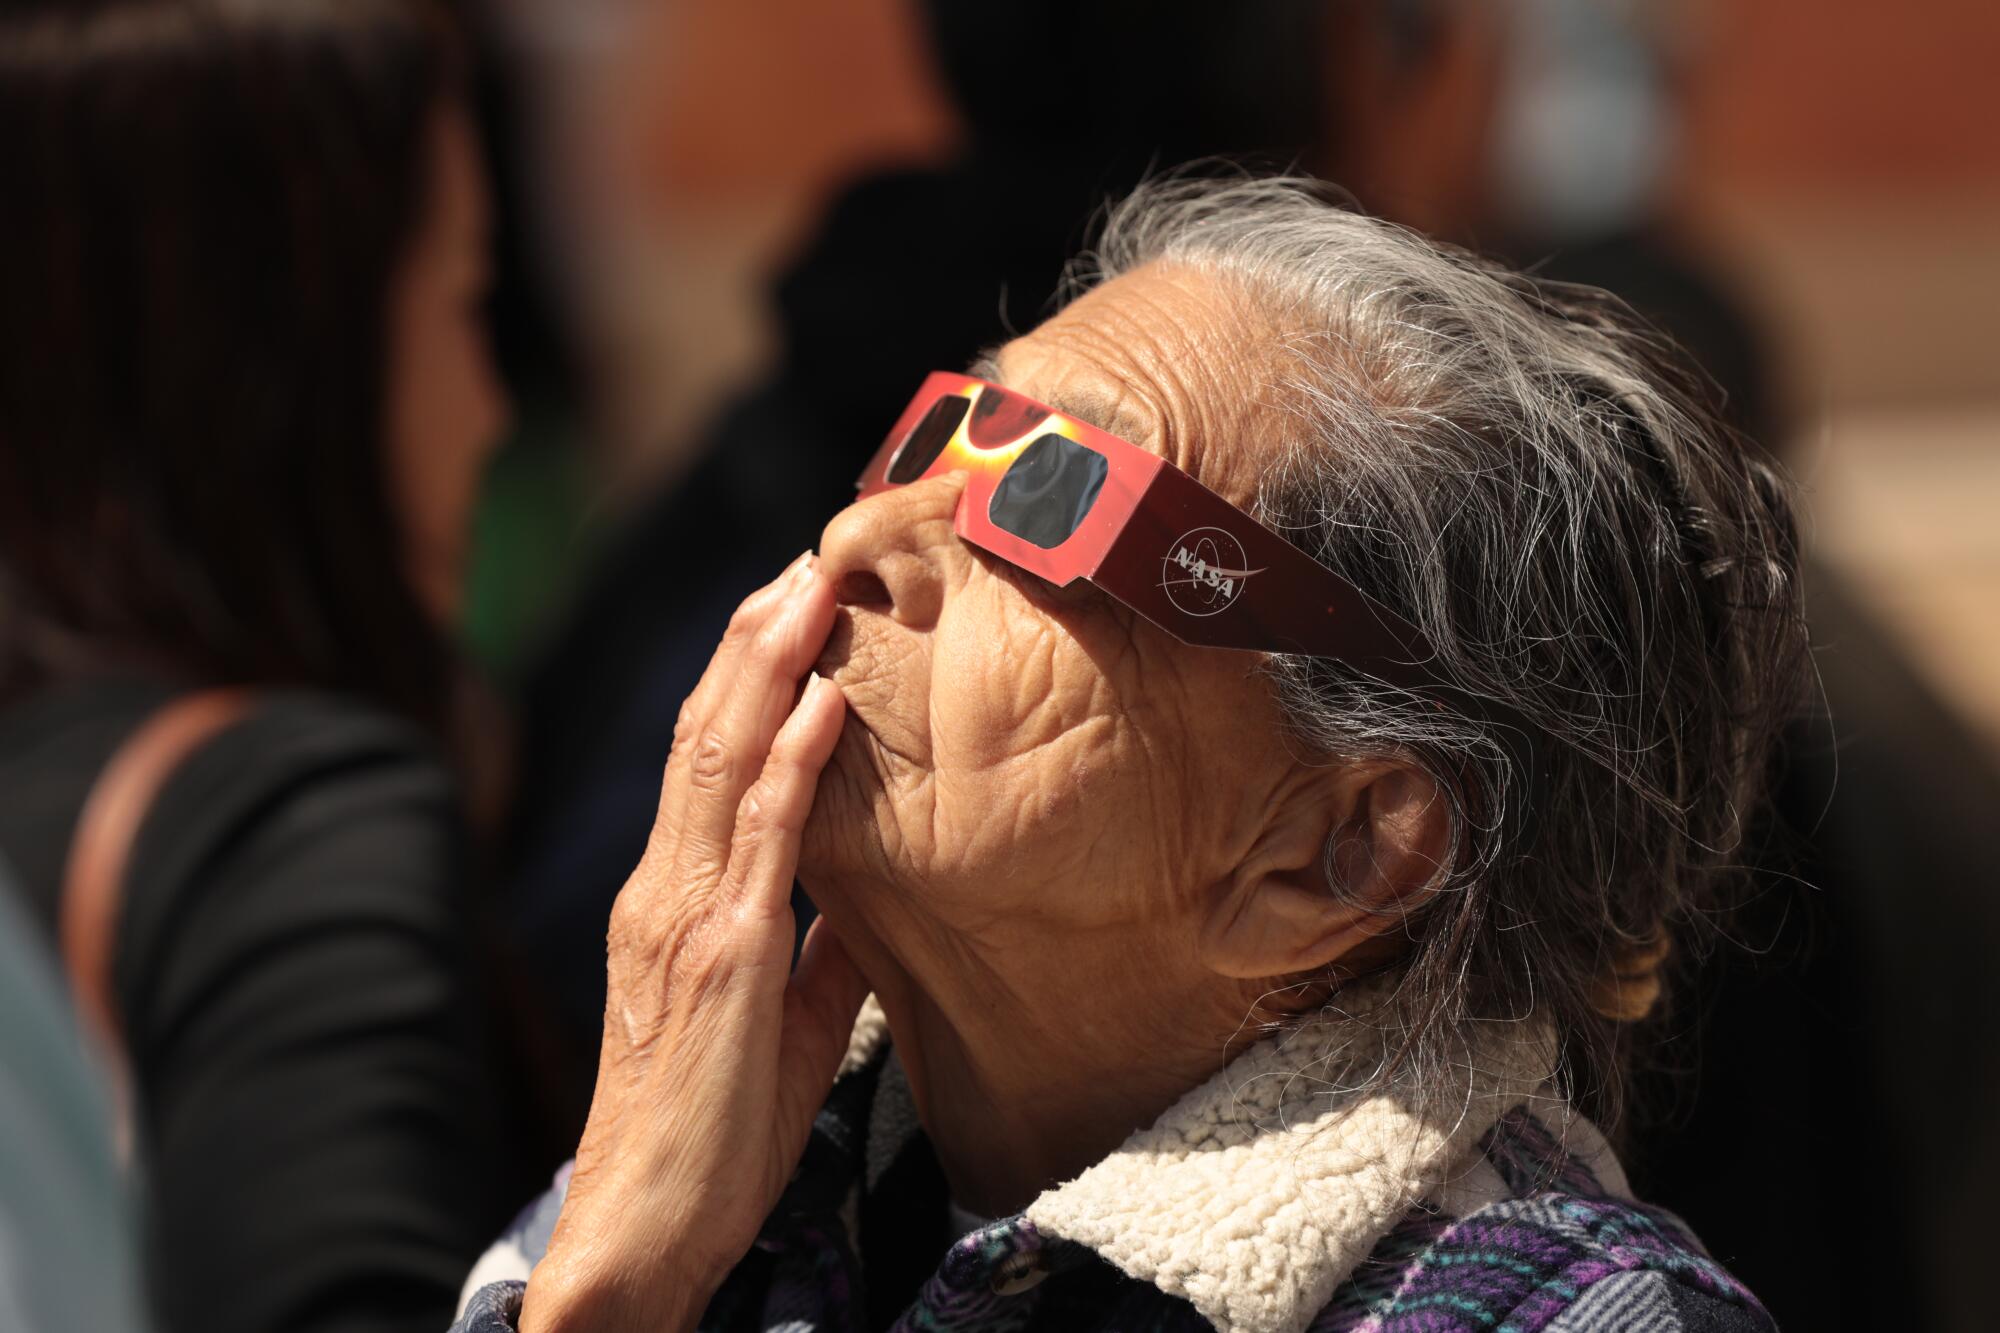 A woman in eclipse glasses looks up and puts her hand to her face.